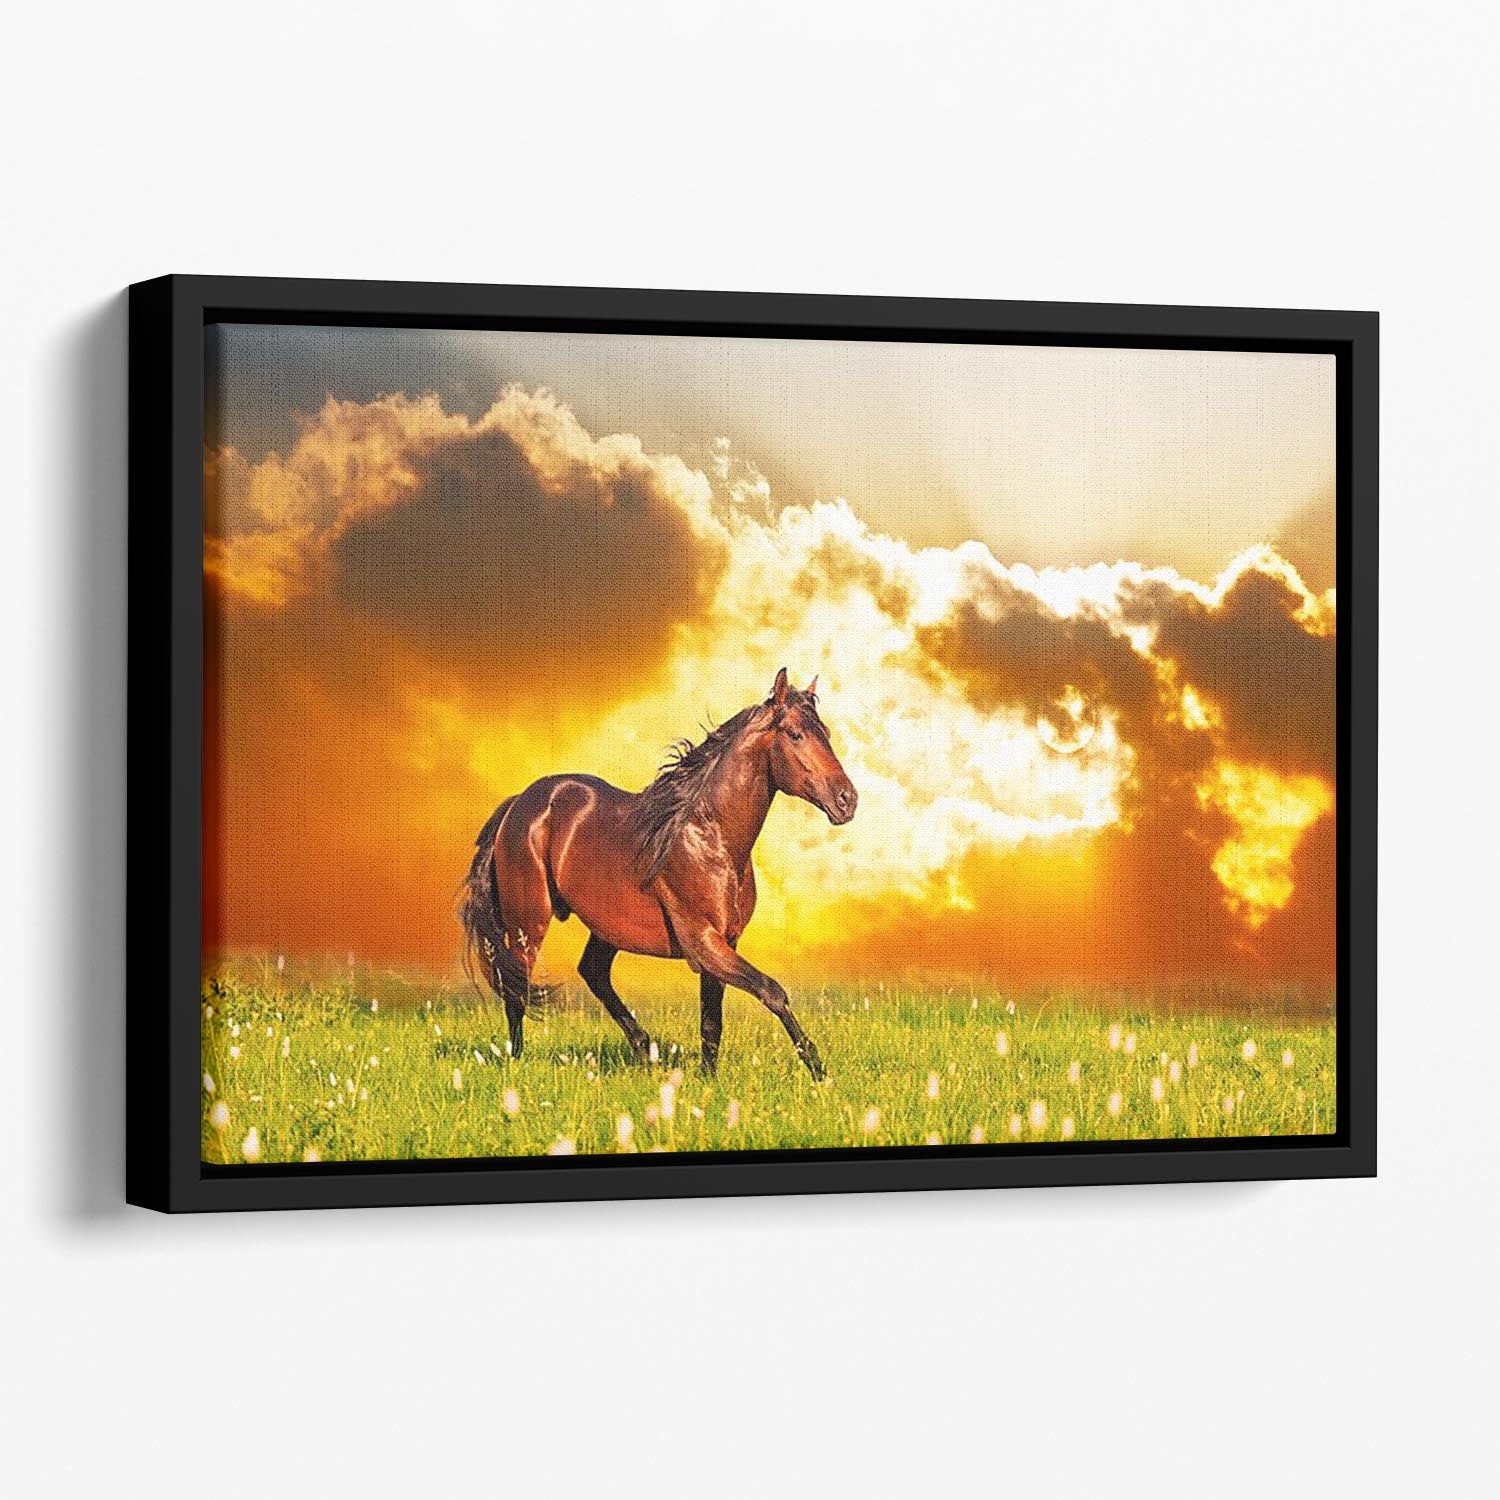 Bay horse skips on a meadow against a sunset Floating Framed Canvas - Canvas Art Rocks - 1